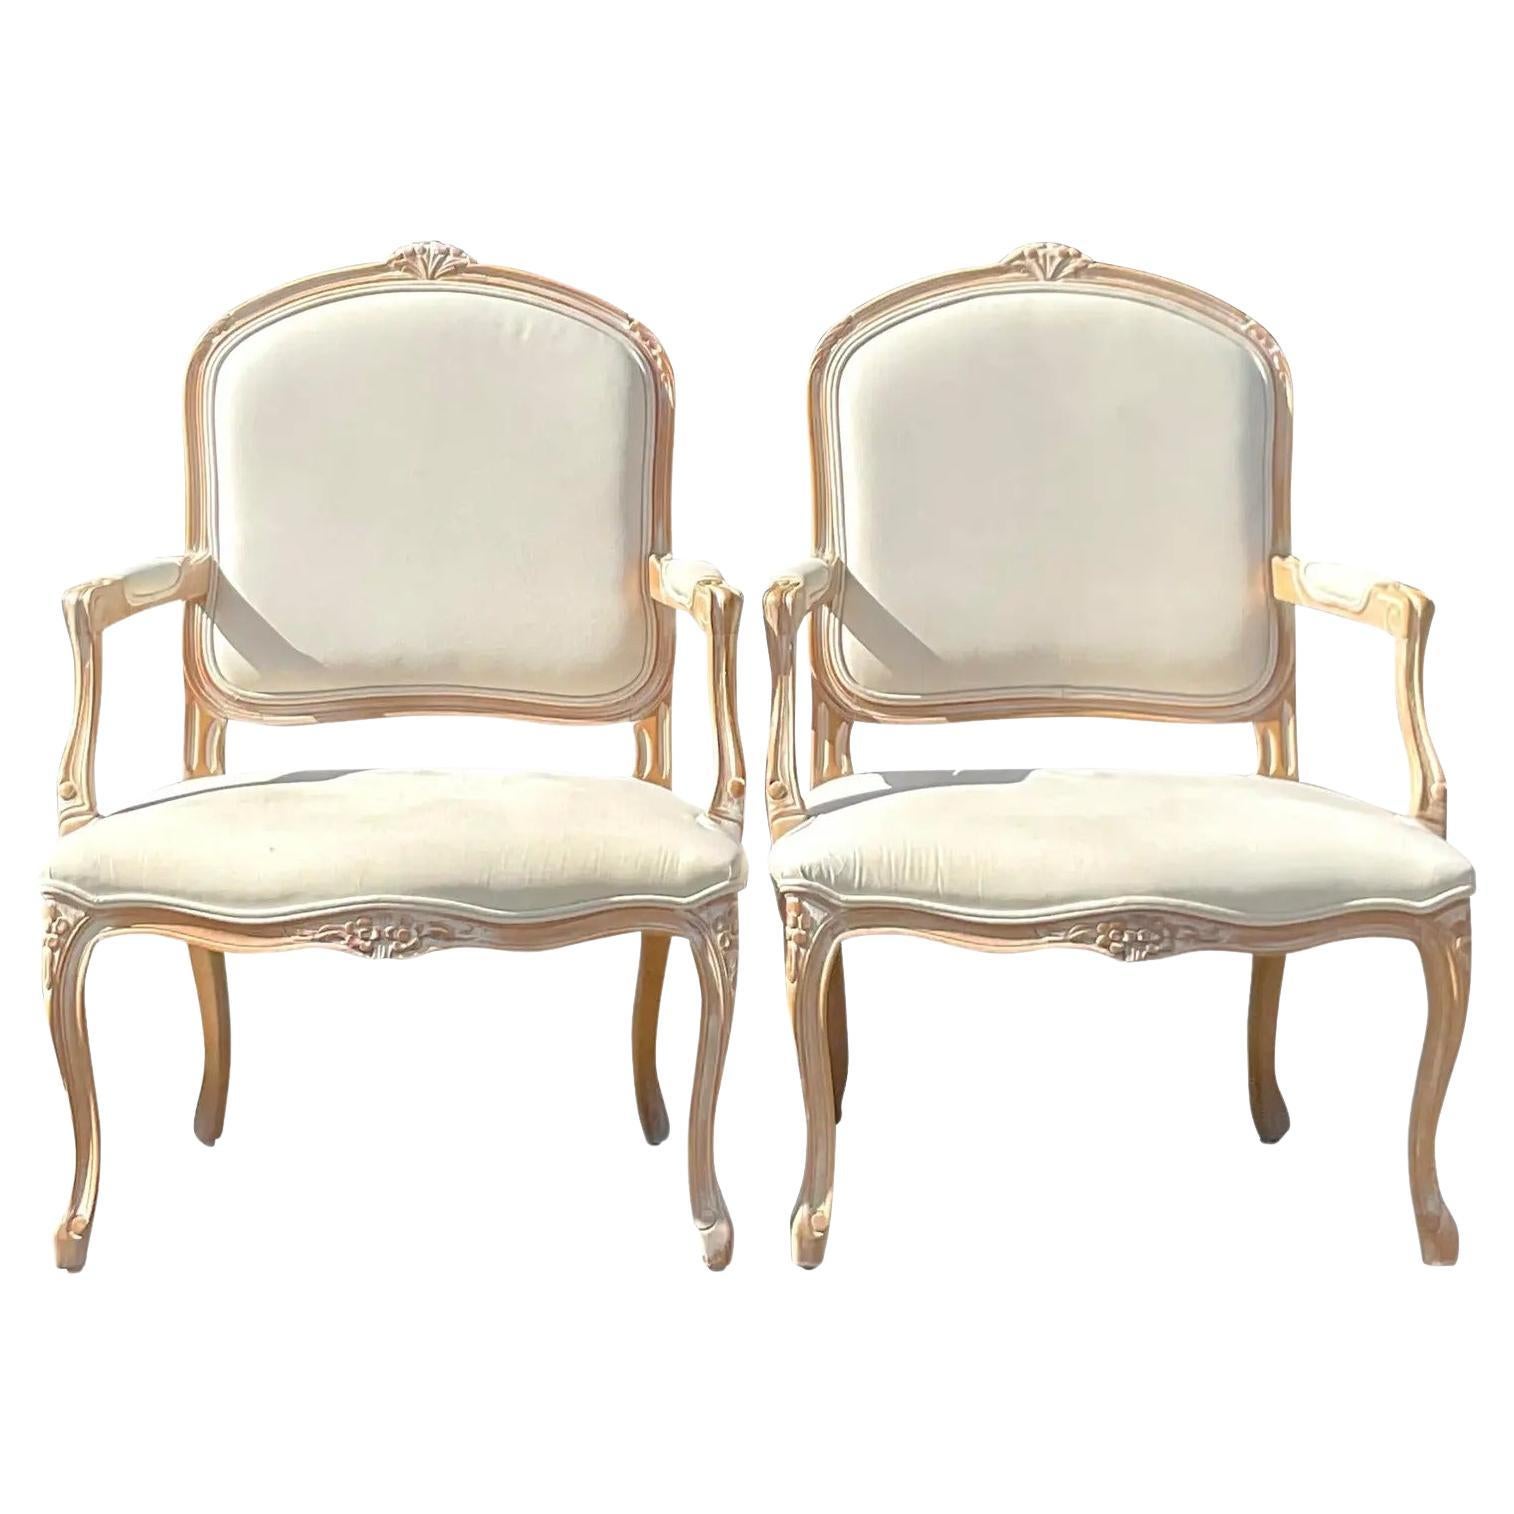 Vintage Regency Bergere Chairs - A Pair For Sale